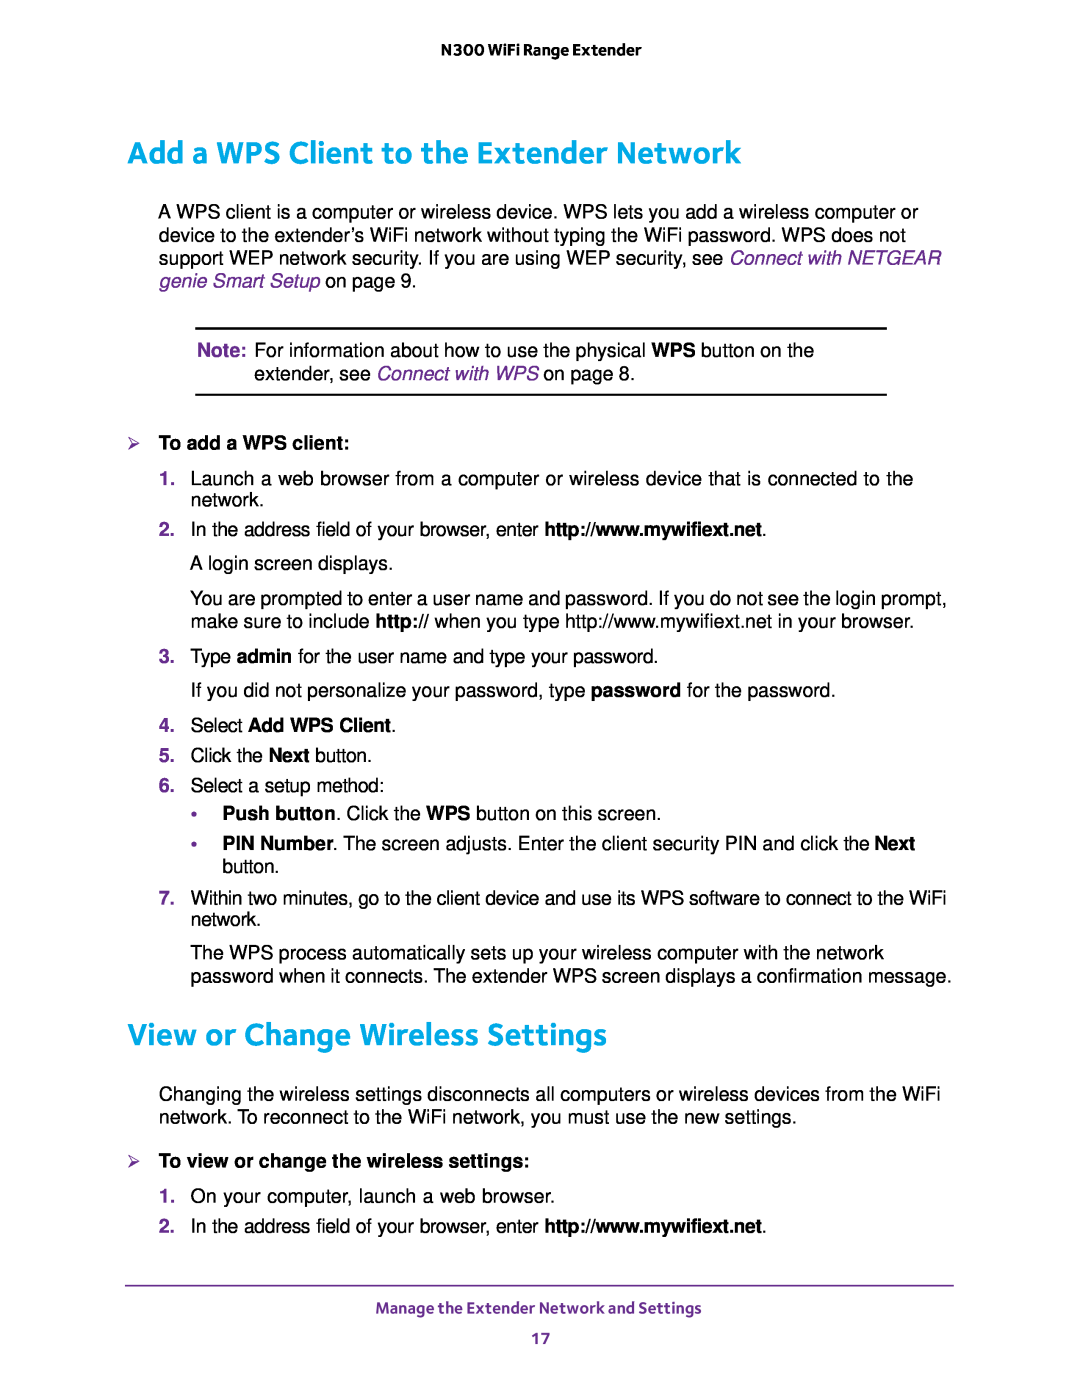 NETGEAR EX2700 Add a WPS Client to the Extender Network, View or Change Wireless Settings,  To add a WPS client 